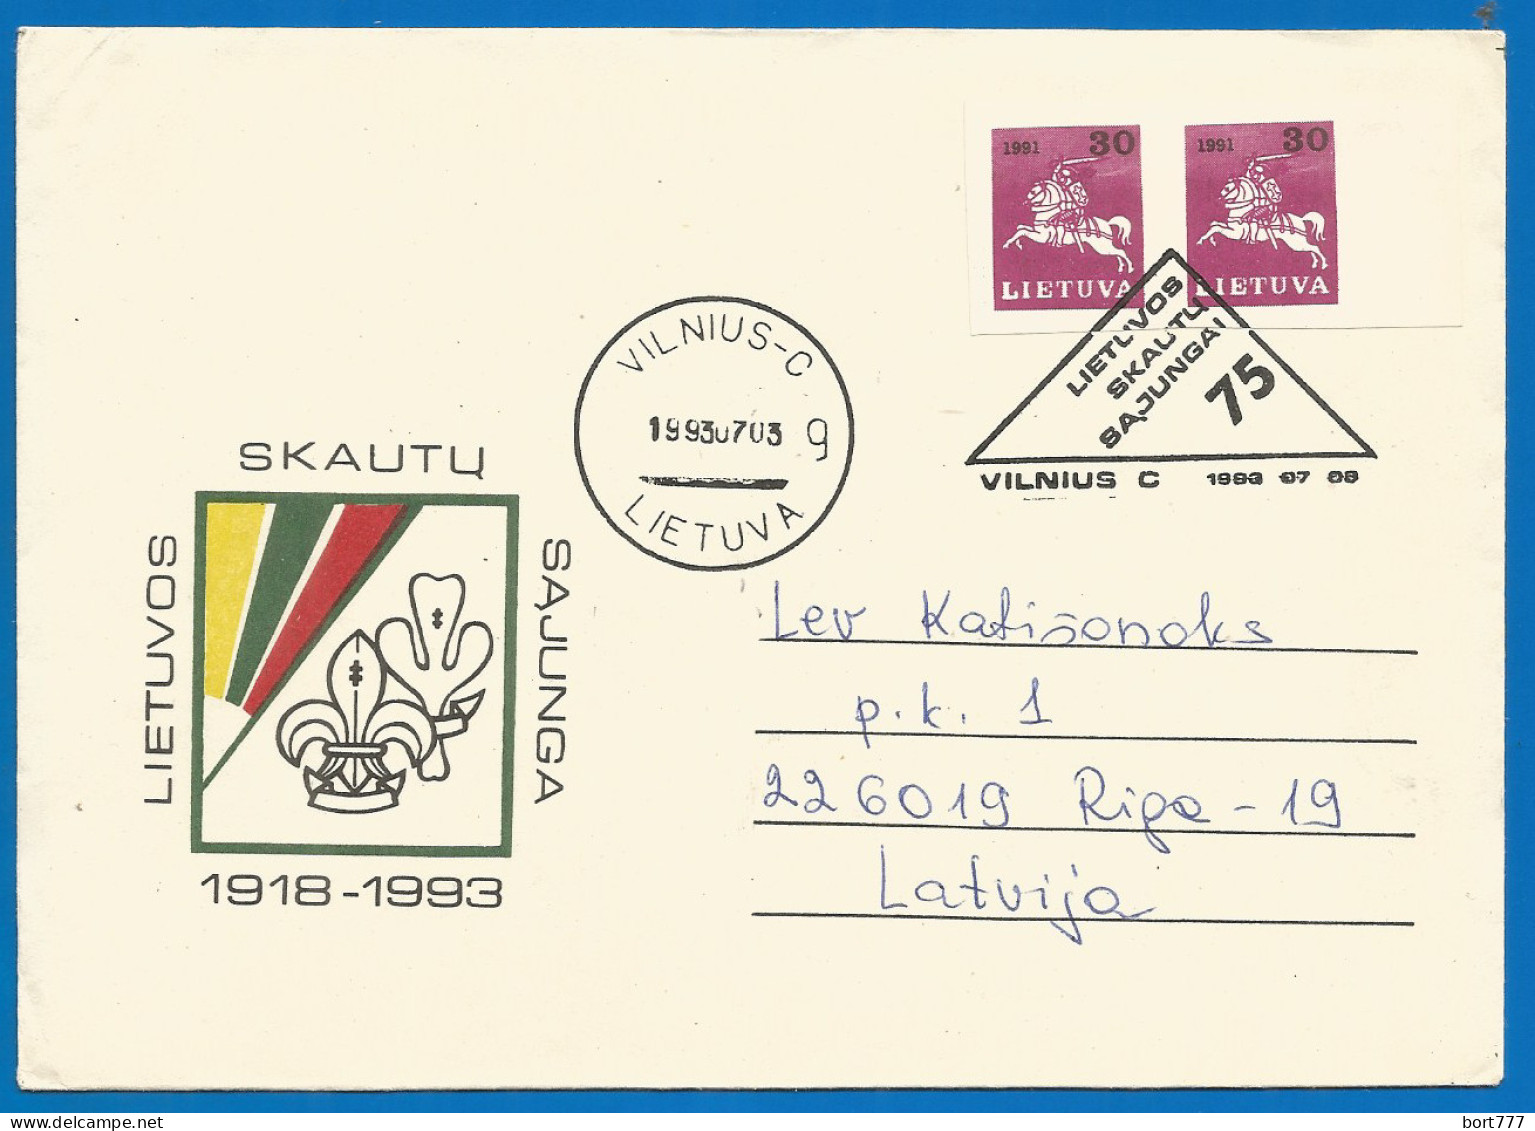 Lithuania Cover 1993 Year - Lithuania